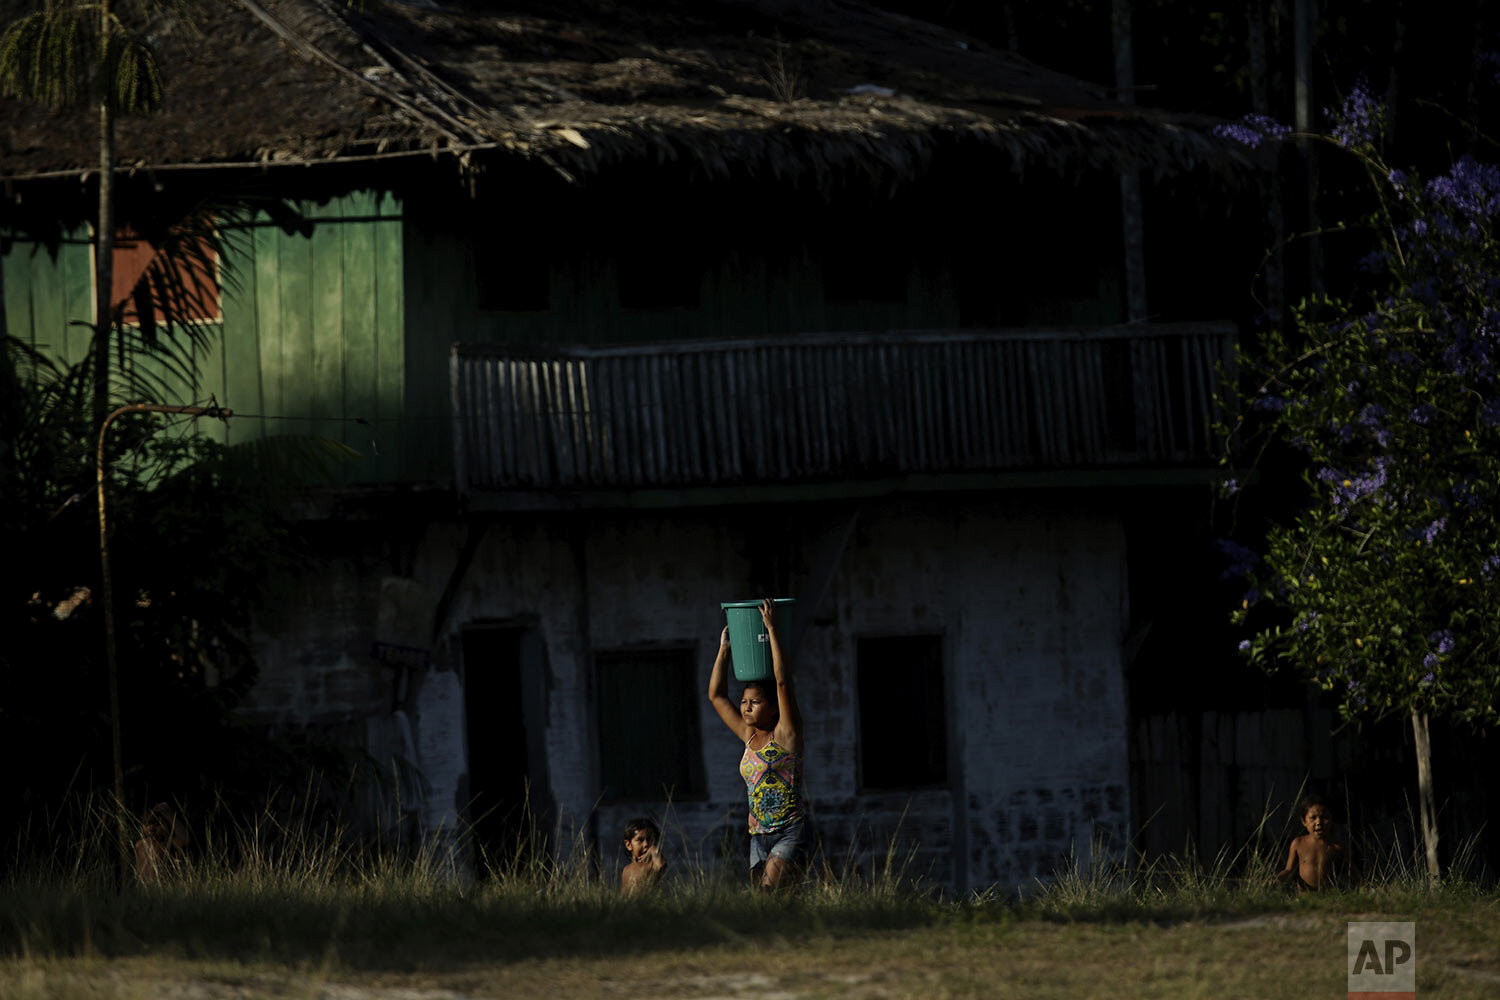  Tenetehara Indigenous Mainara Tembe carries a bucket of water atop her head followed by her children, in the Alto Rio Guama Indigenous Territory, near Paragominas, in the northern Brazilian state of Para, Monday, Sept. 7, 2020. (AP Photo/Eraldo Pere